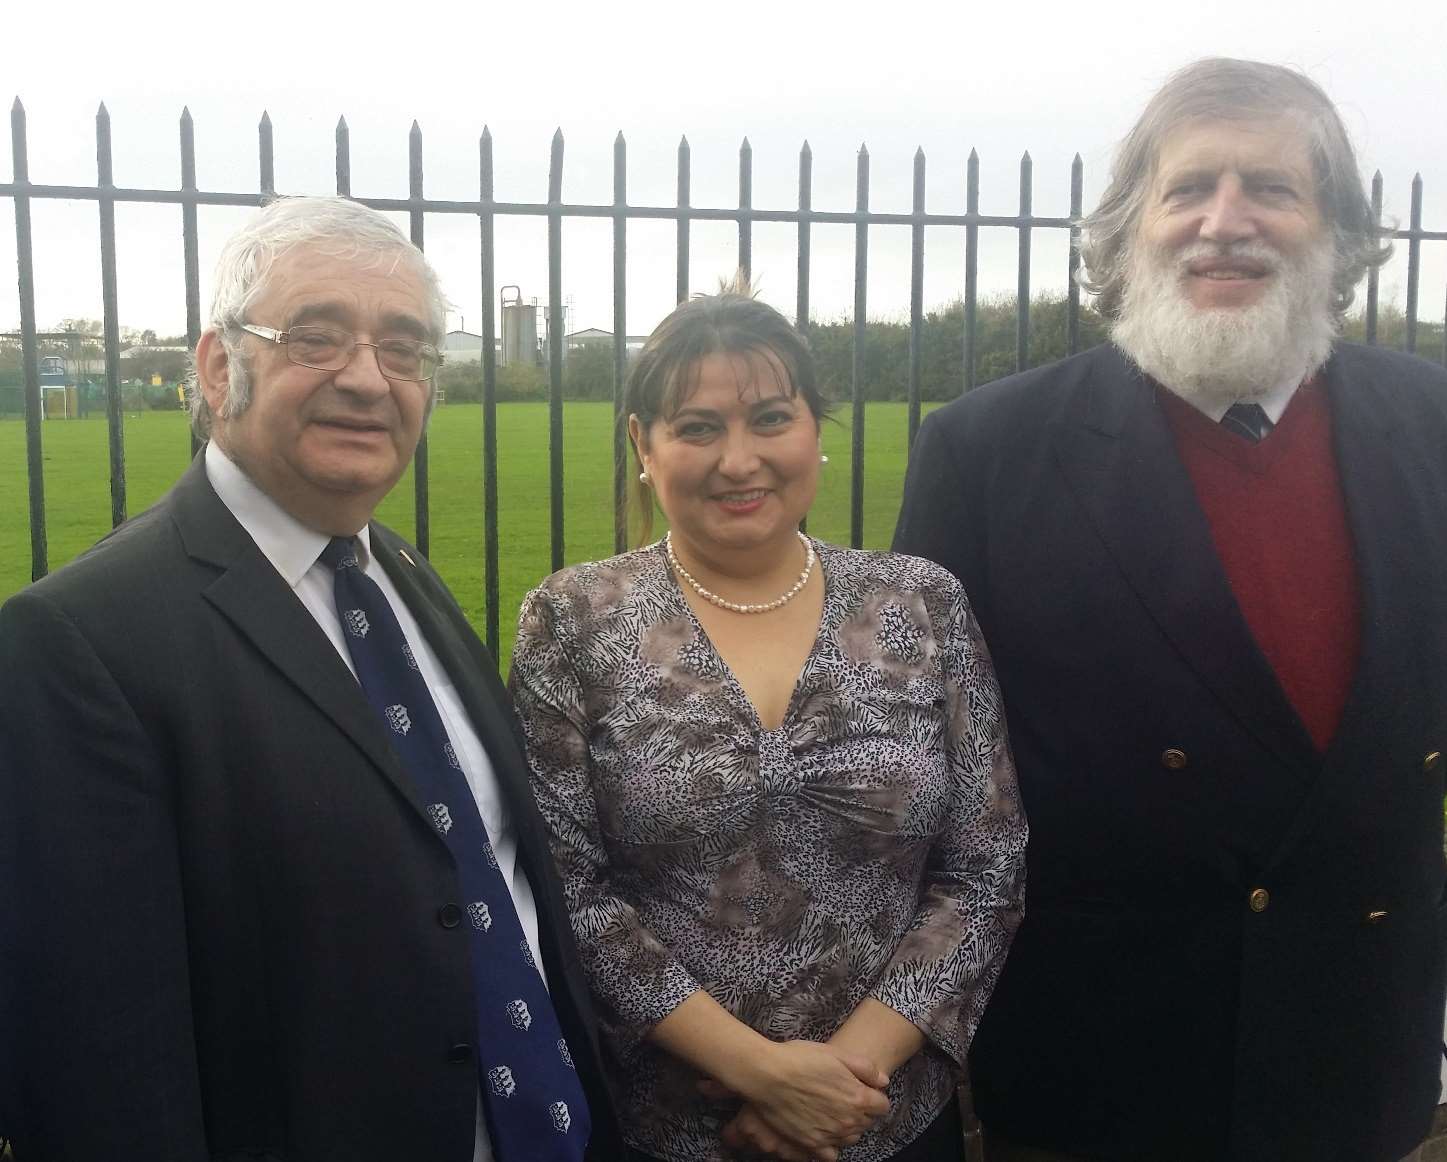 The Labour Party of Deal and Dover has chosen its North Deal candidates. They are Cllr Ben Bano, Zoila Santos and Cllr Bill Gardner